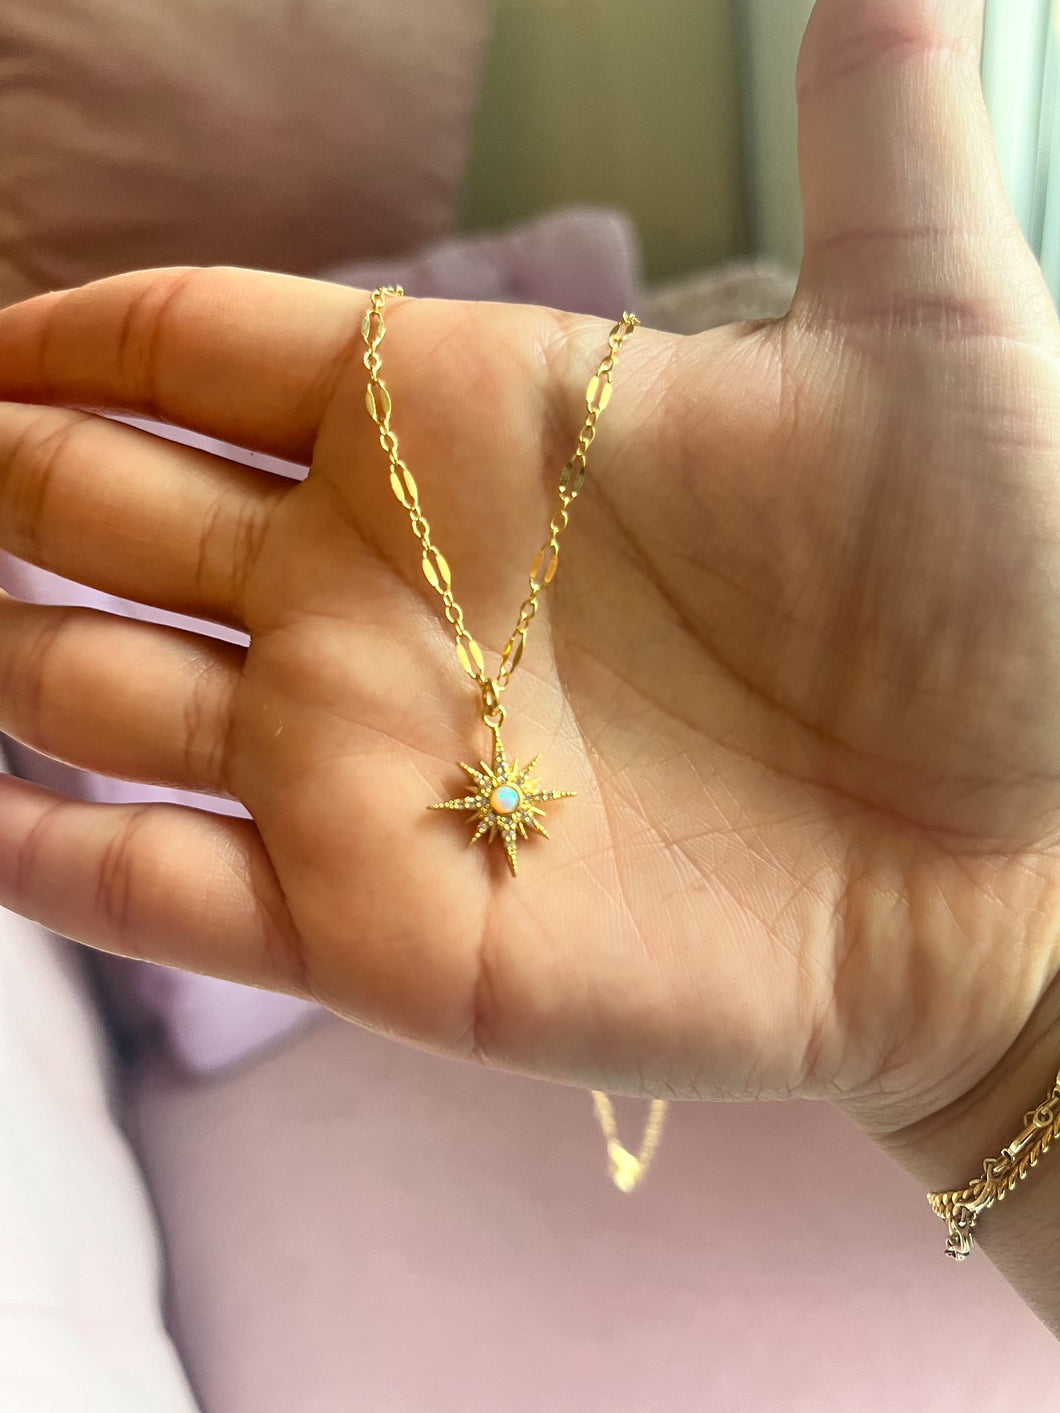 Large Celestial Opal Star Charm Necklace - Gold Filled